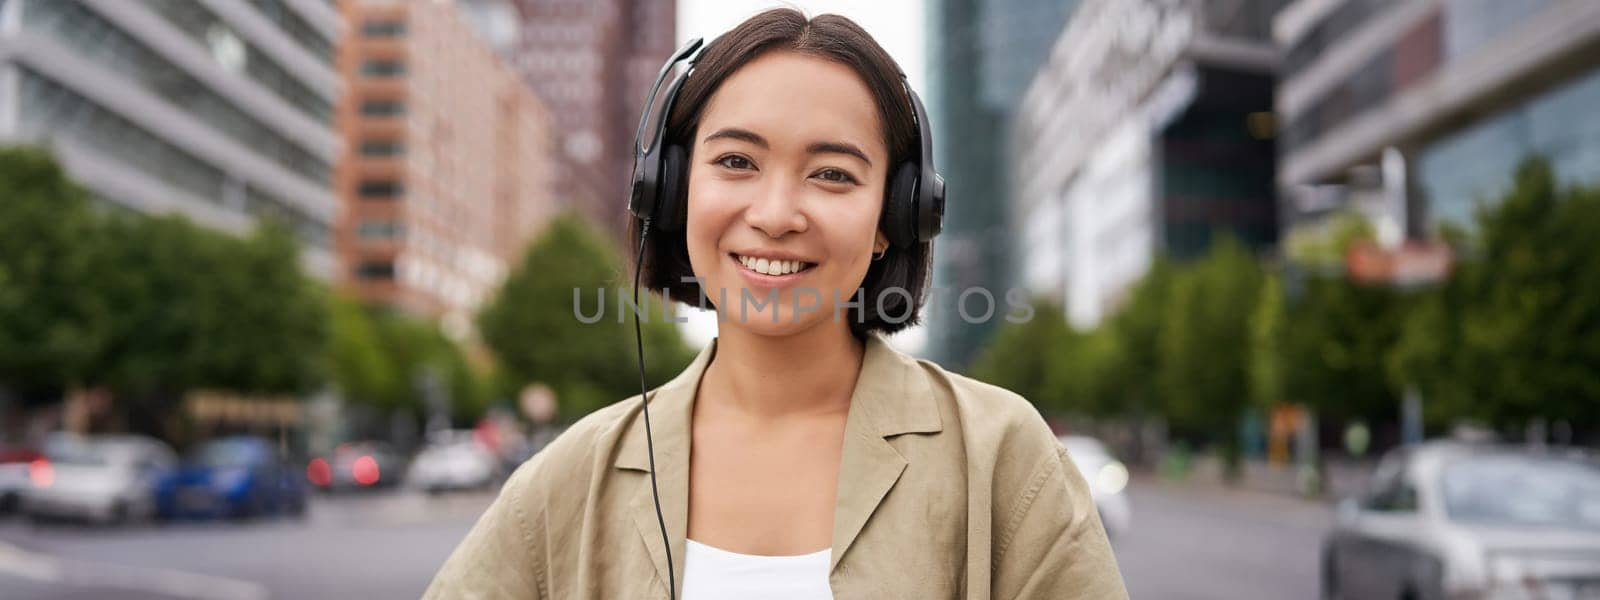 Portrait of smiling asian woman in headphones, standing in city centre on street, looking happy, listening to music by Benzoix